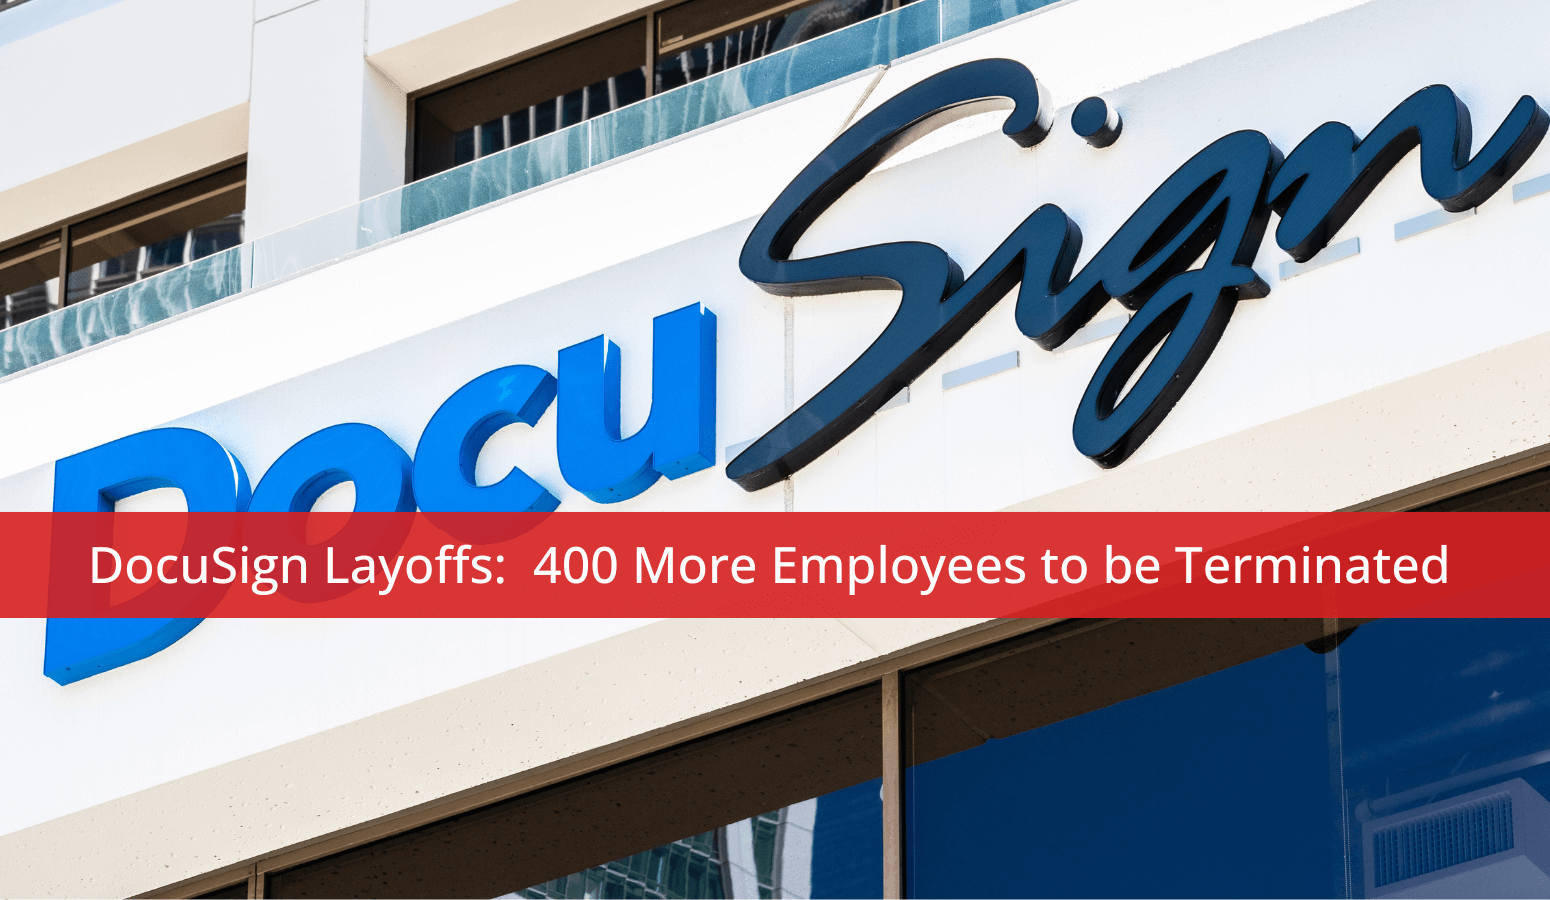 Featured image for “DocuSign Layoffs:  400 More Employees to be Terminated”